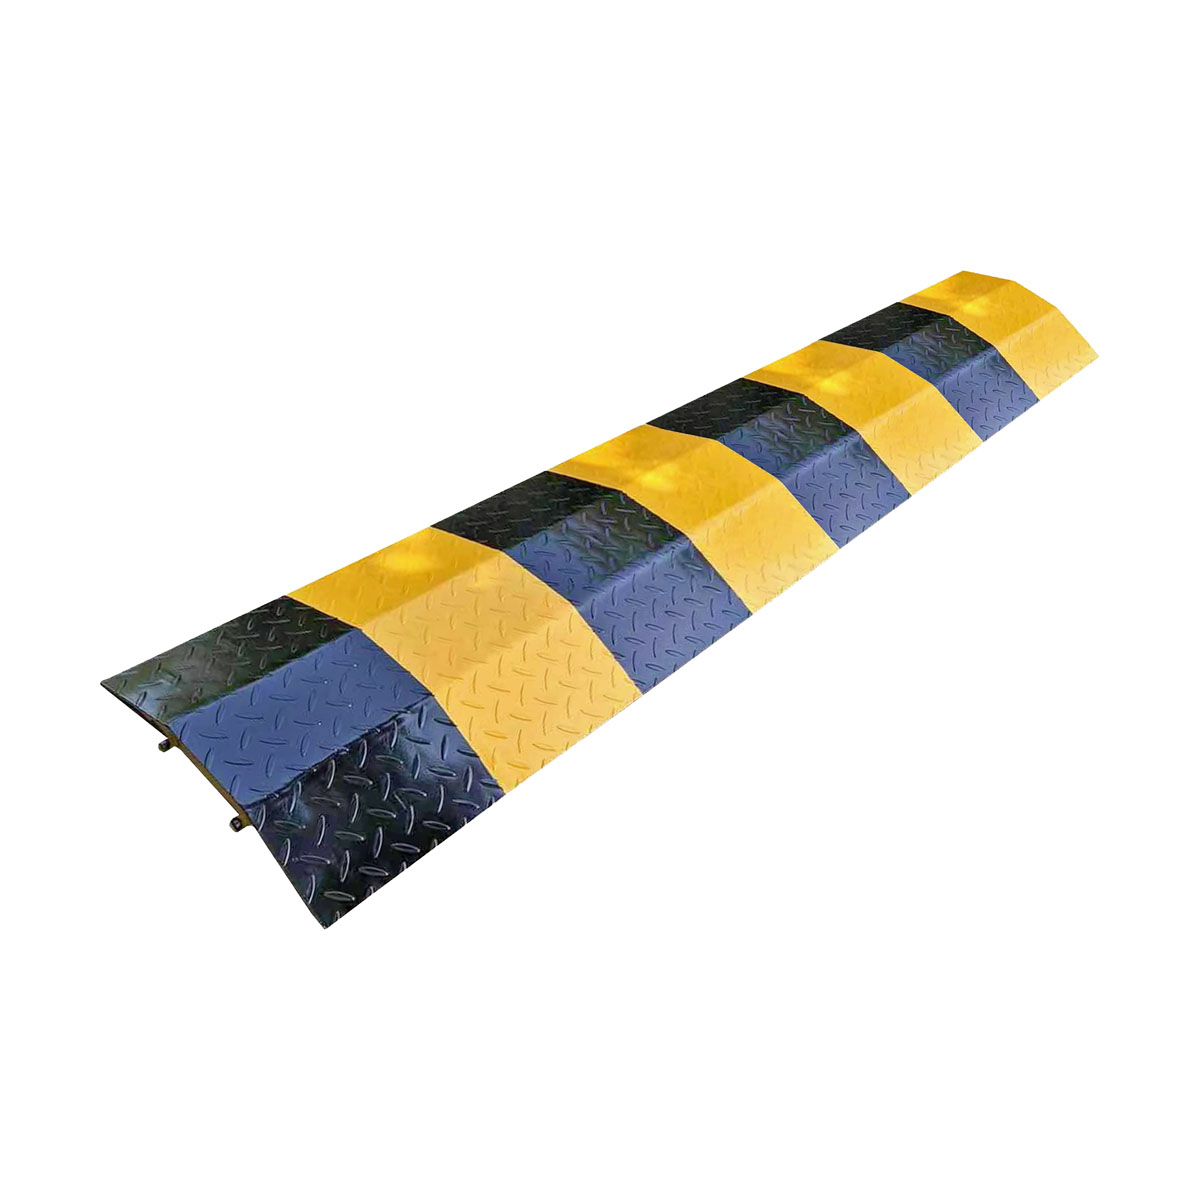 Heavy Duty Steel Speed Hump Black and Yellow Section